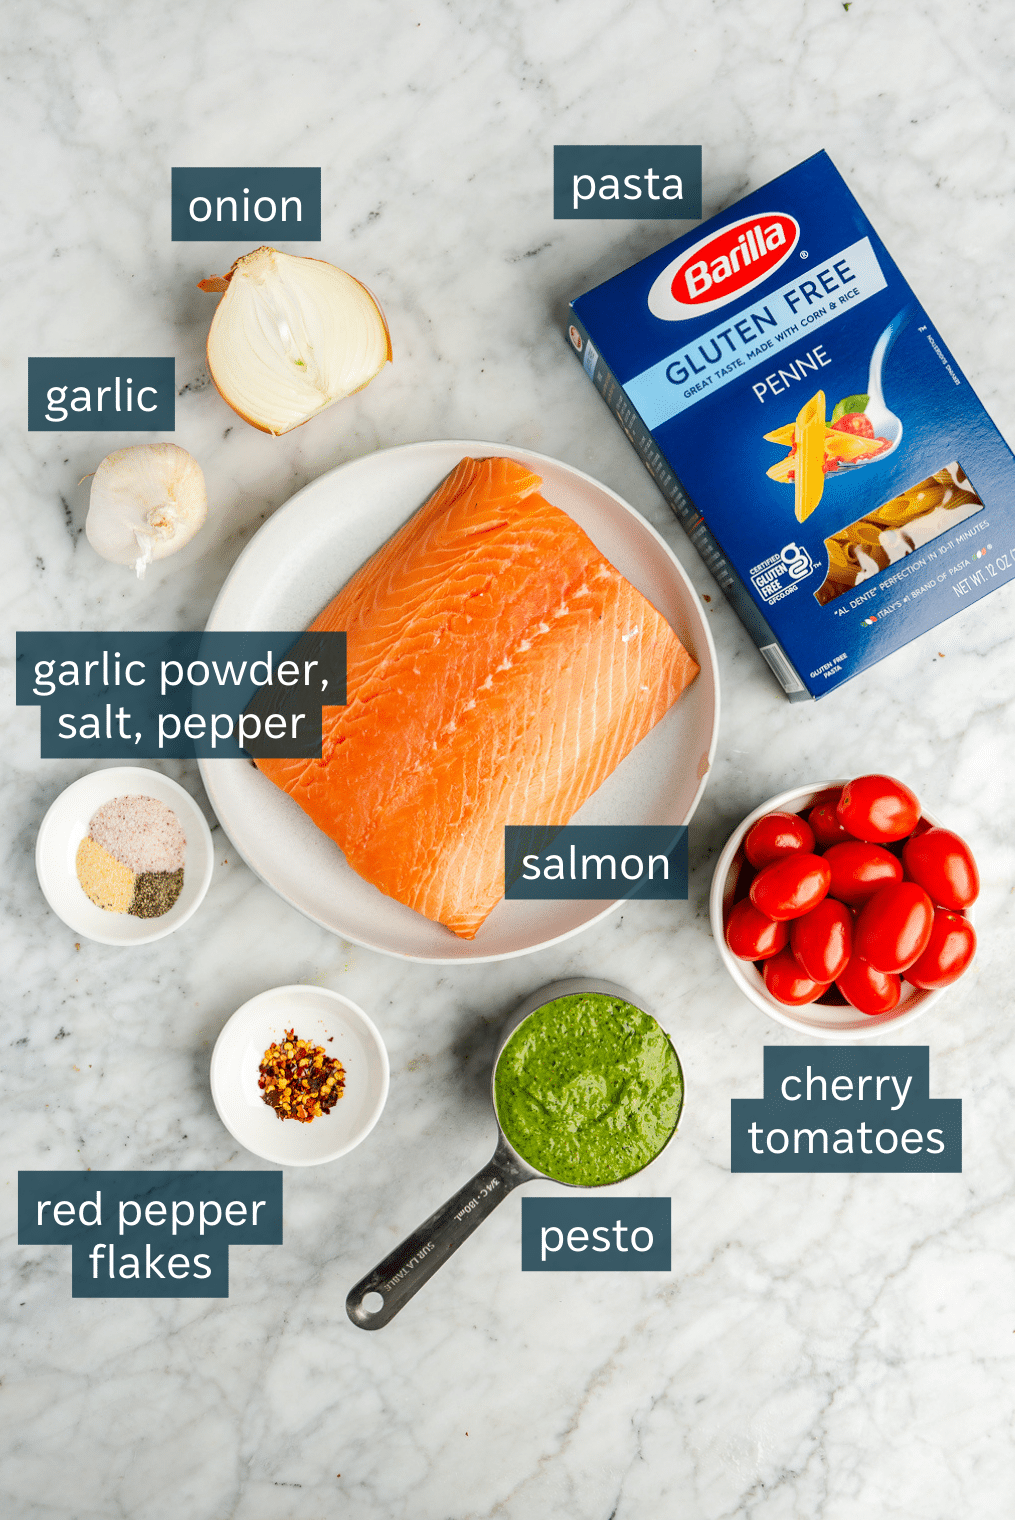 All of the ingredients for salmon pesto pasta on a marble surface.